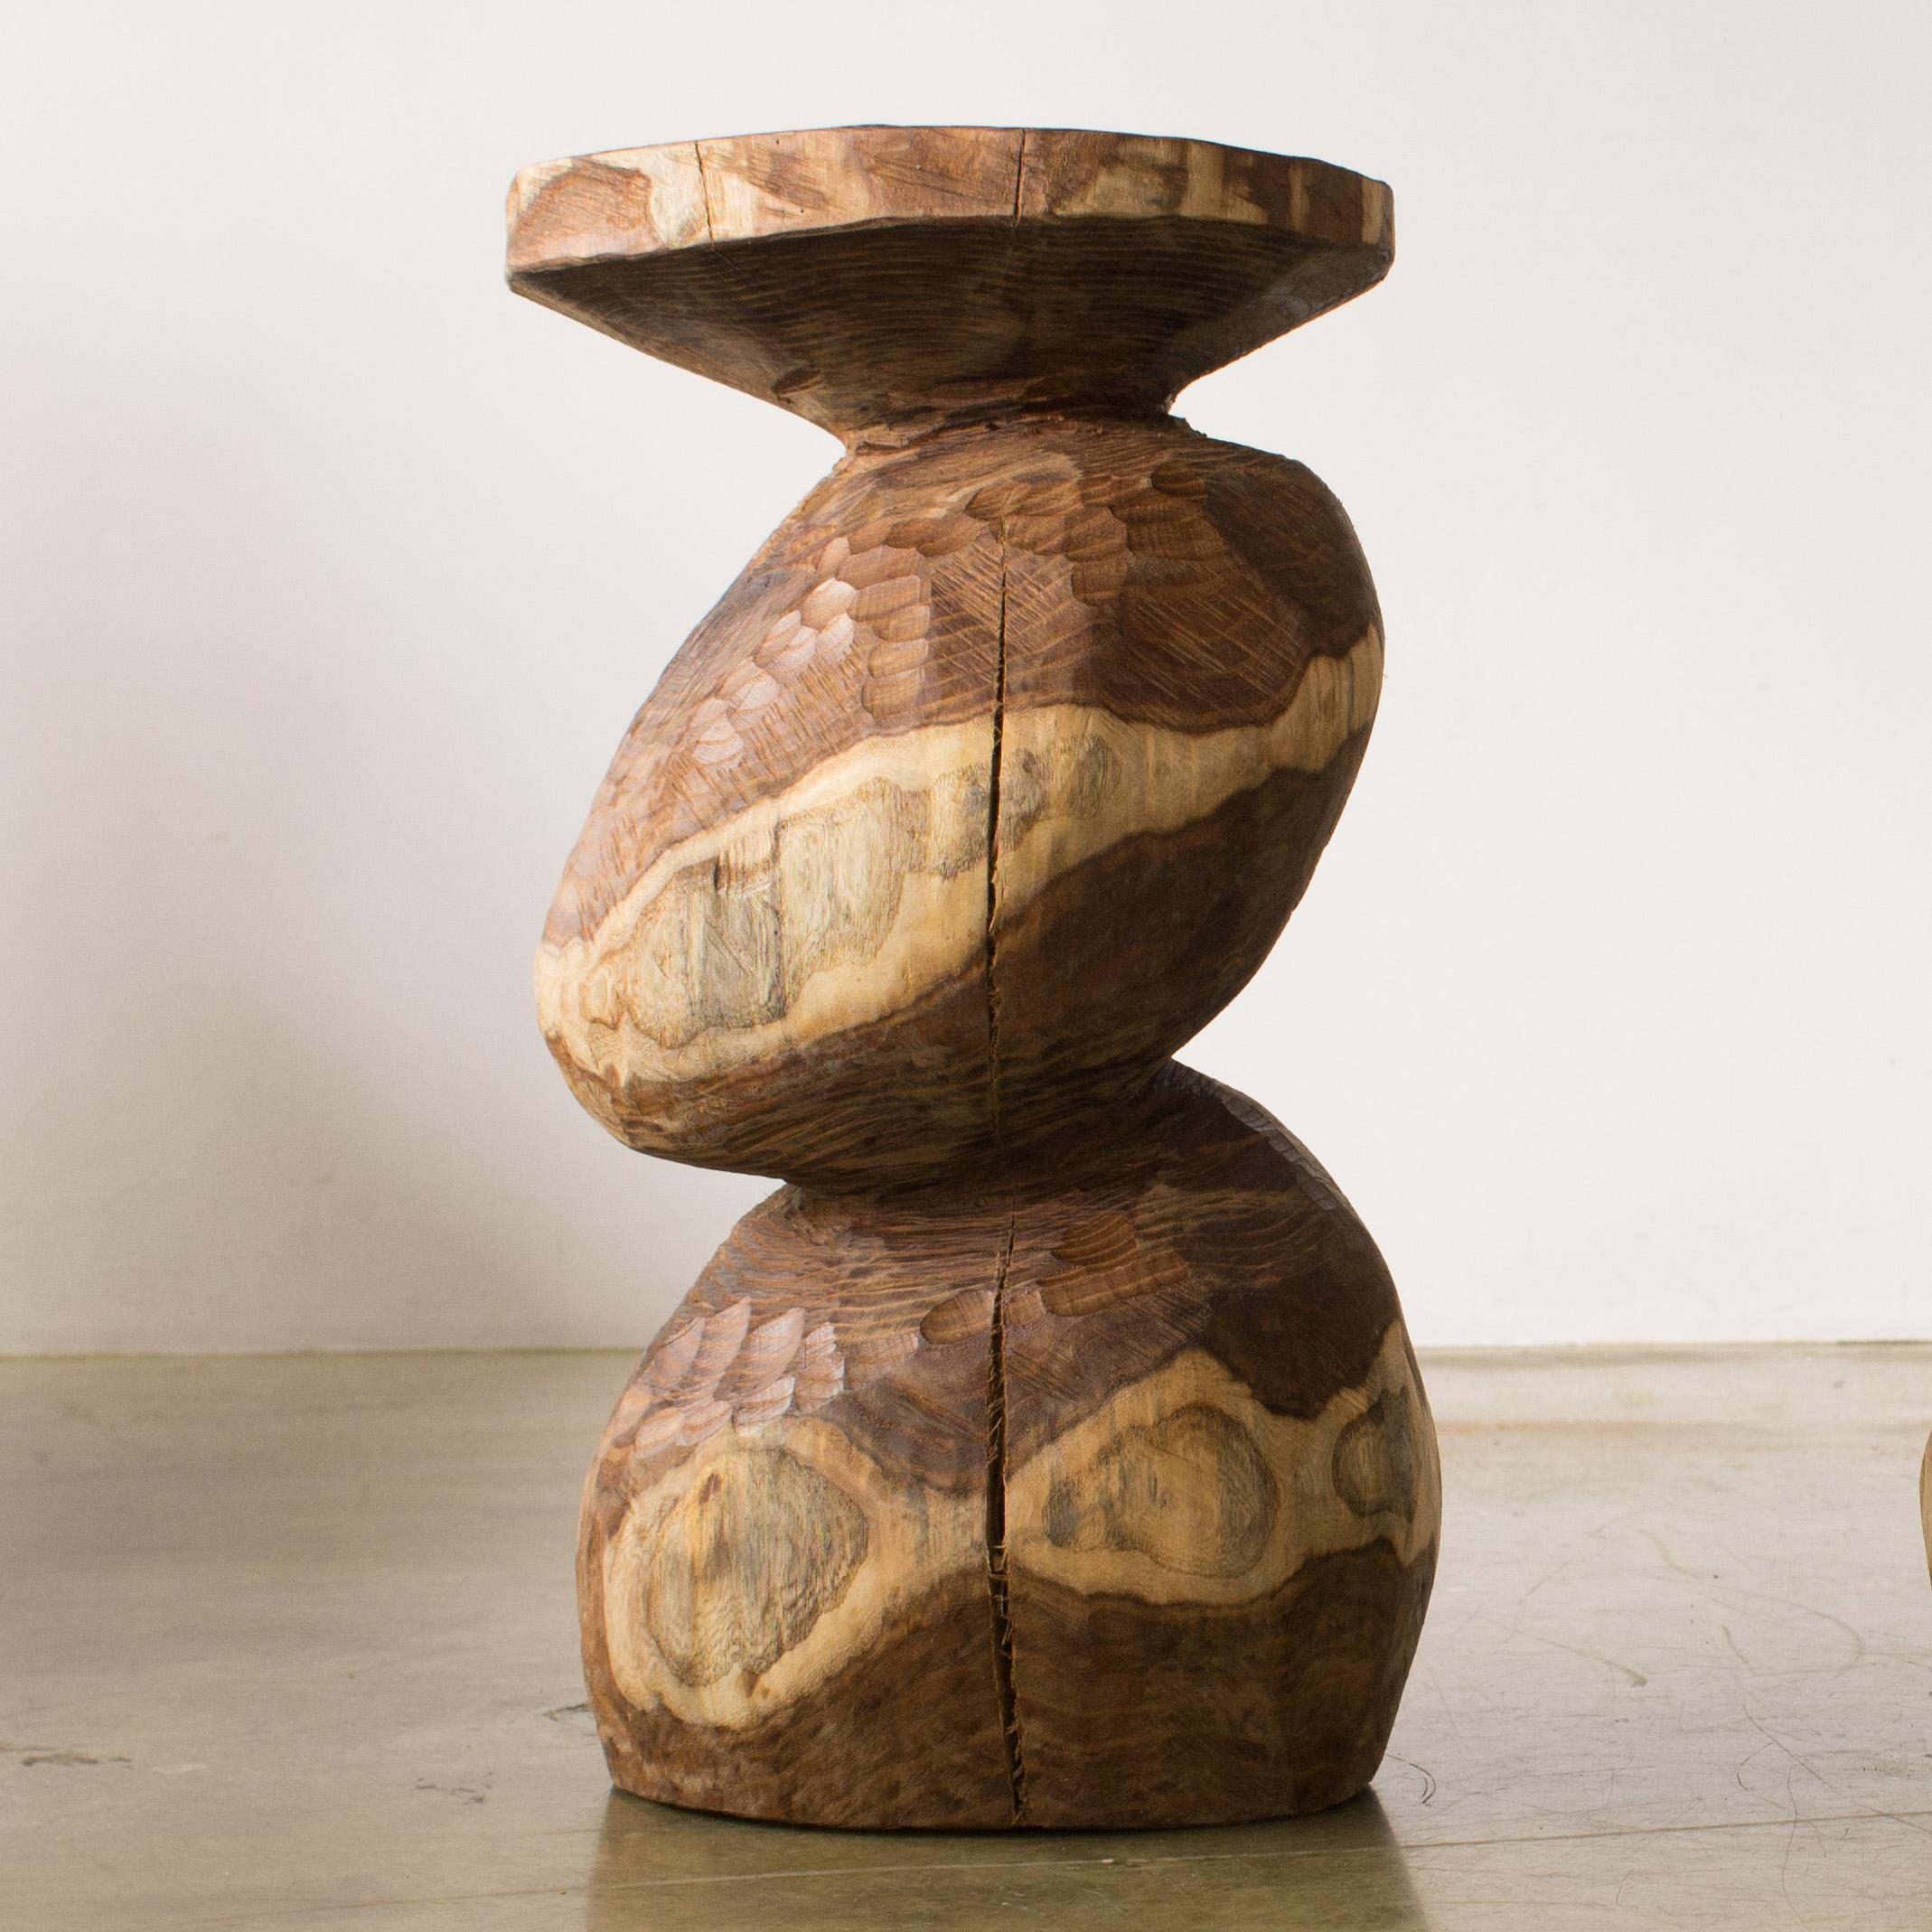 Name: Mamma
Sculptural stool by Hiroyuki Nishimura and zone carved furniture
Material: Walnut
This work is carved from log with some kinds of chainsaws.
Most of wood used for Nishimura's works are unable to use anything, these woods are